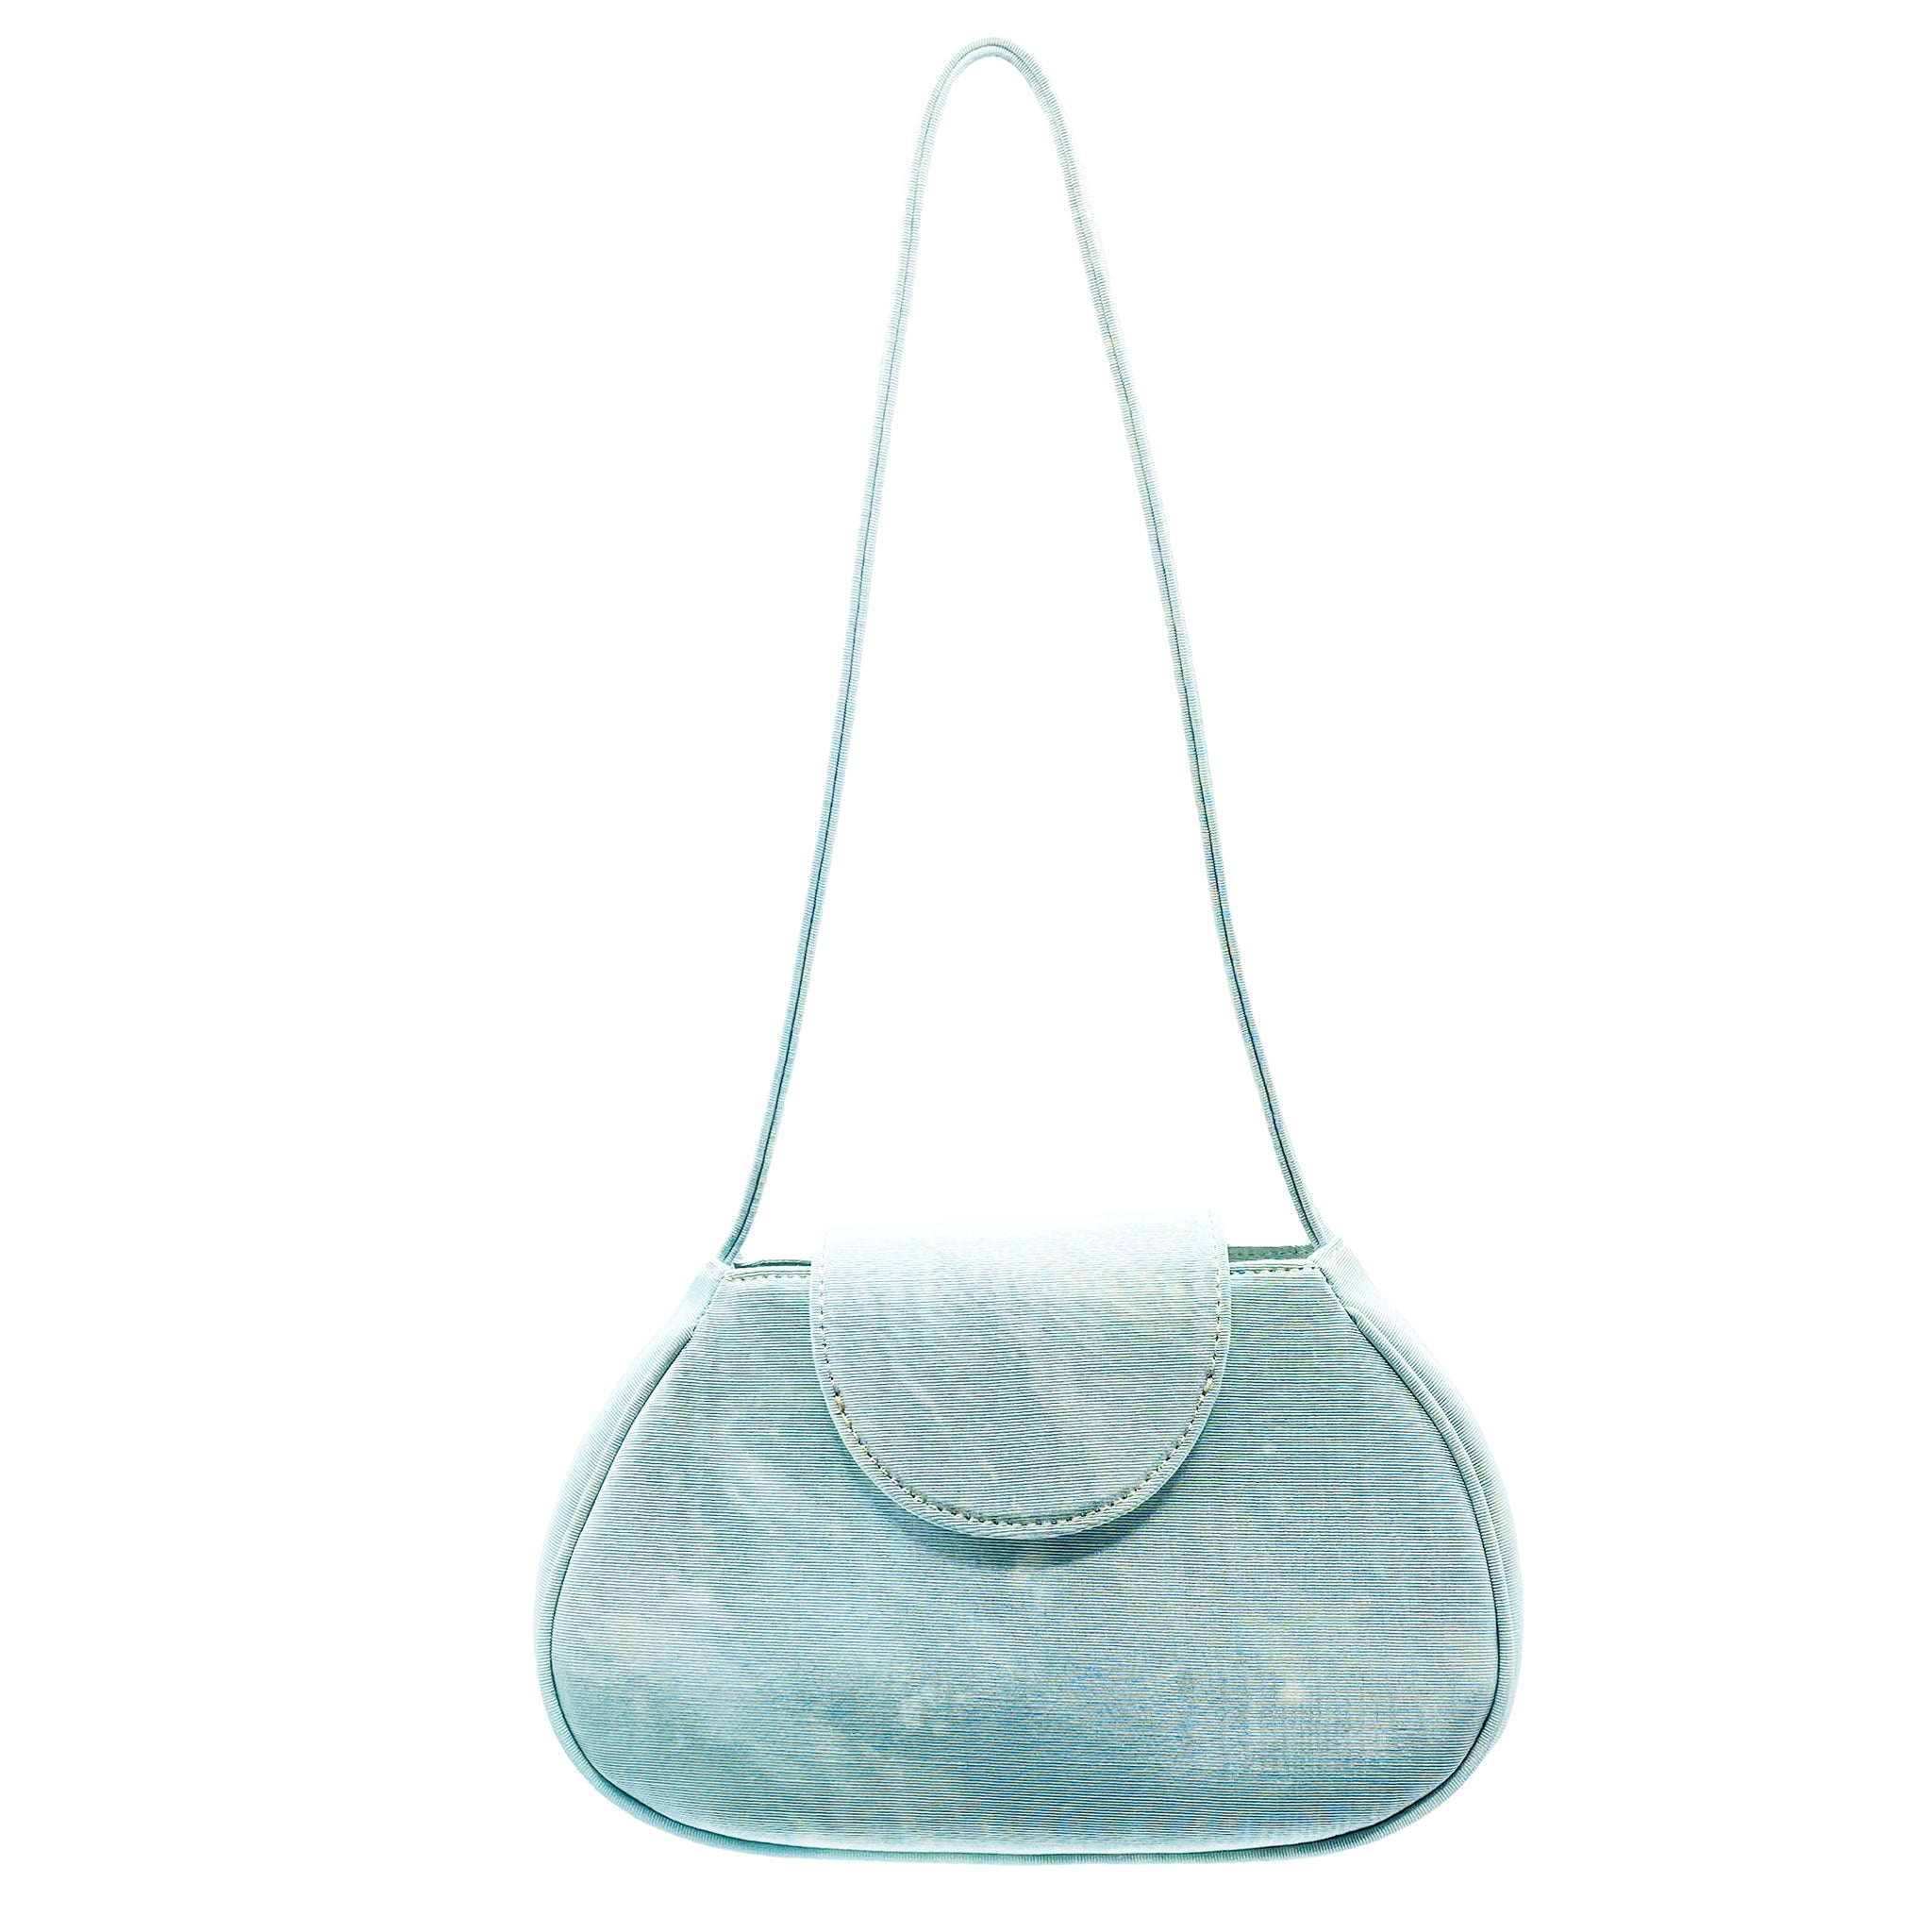 Ineva Baguette in Seafoam Tie Dye Moire - For the Ages